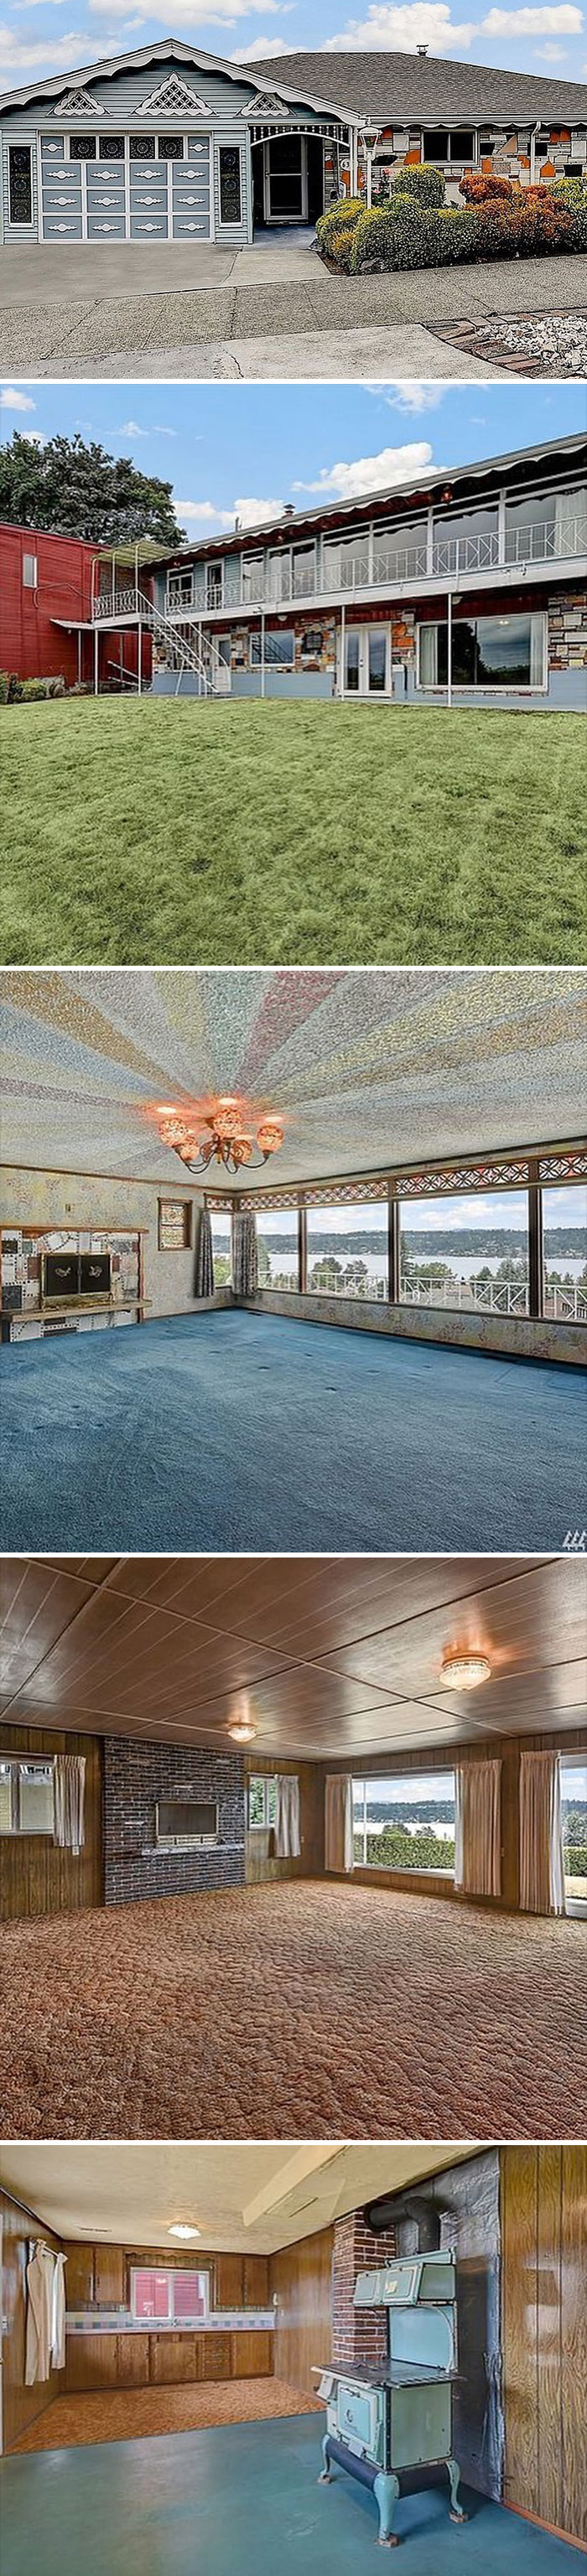 I Wouldn’t Touch A Thing. Seattle, Wa. $1,085,000